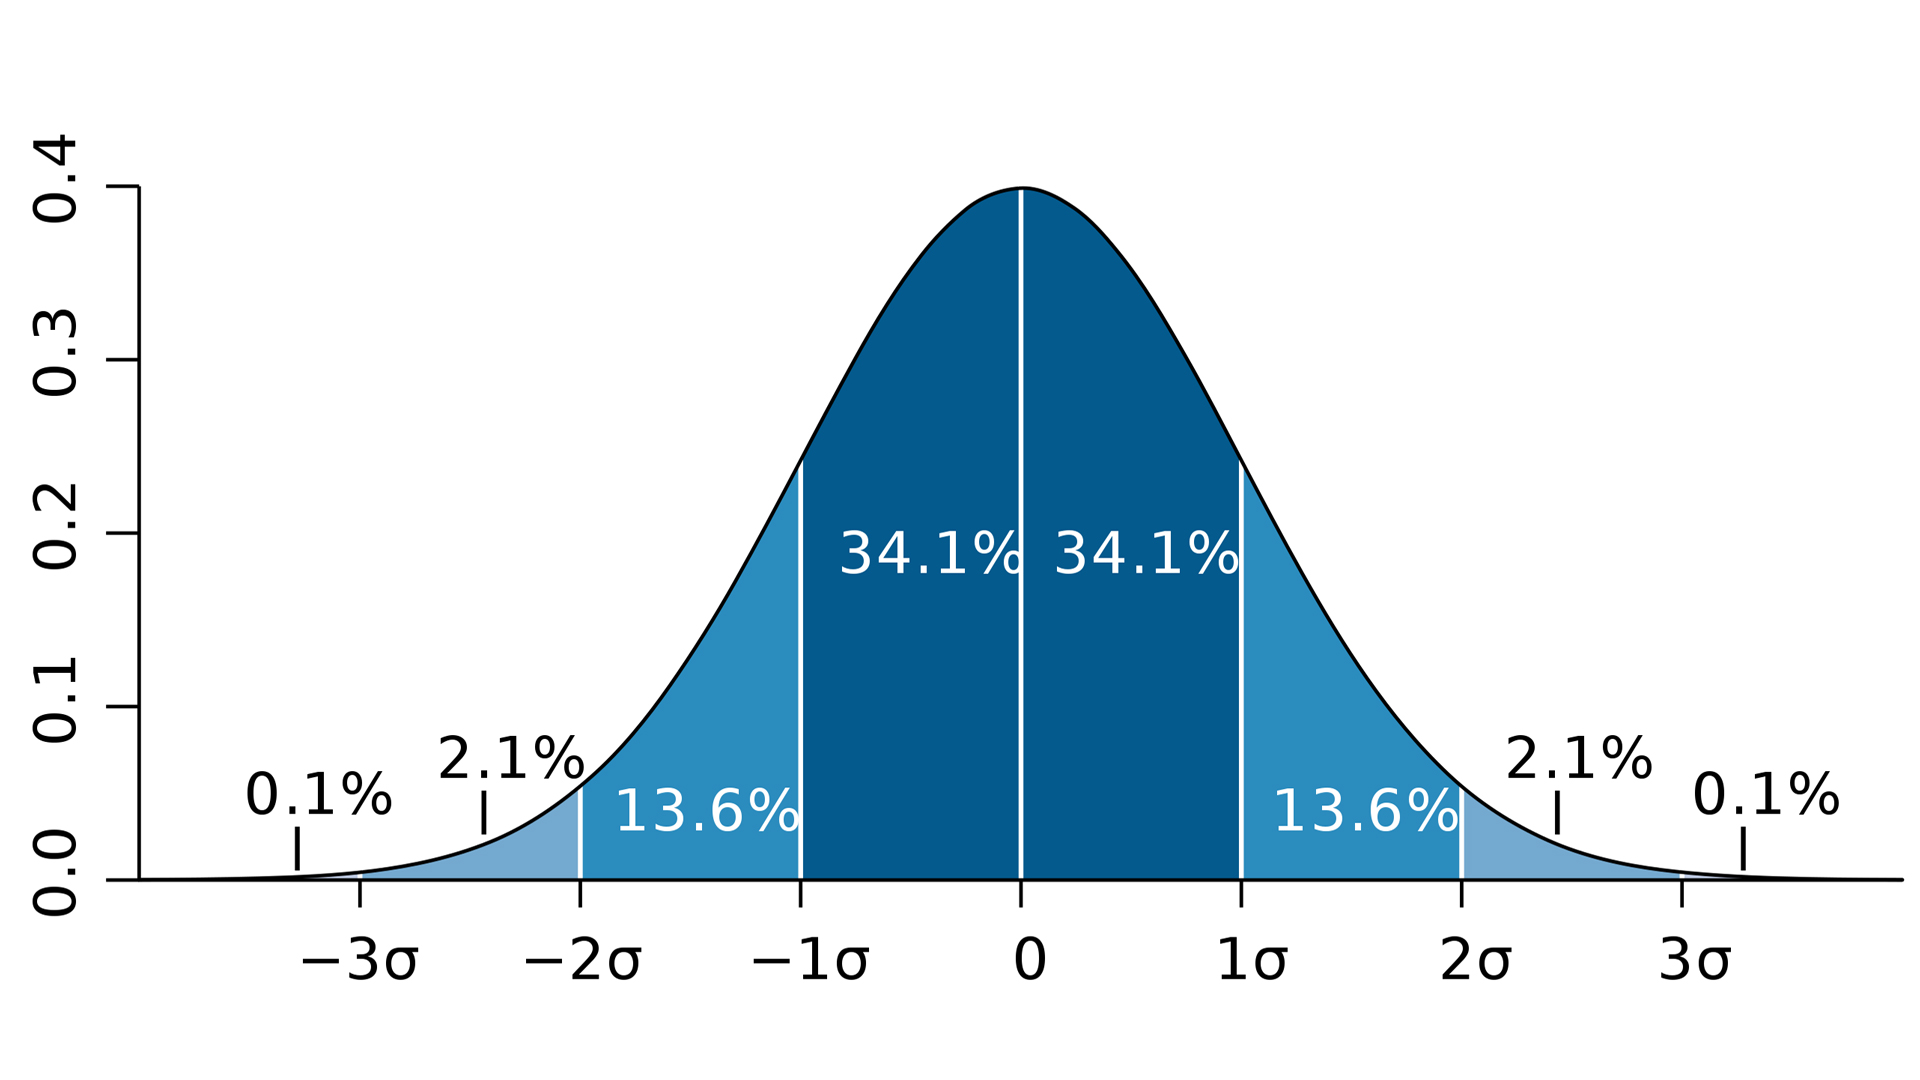 An example of a normal (Gaussian) distribution in chart form. The first standard deviation away from the center of the chart (the mean of the samples collected) comprise a total of 34.1% of the population in either direction, making 68.2% of the total curve within 1 standard deviation. The next standard deviation comprises 13.6% in either direction, and the third comprises 2.1%, and so on.